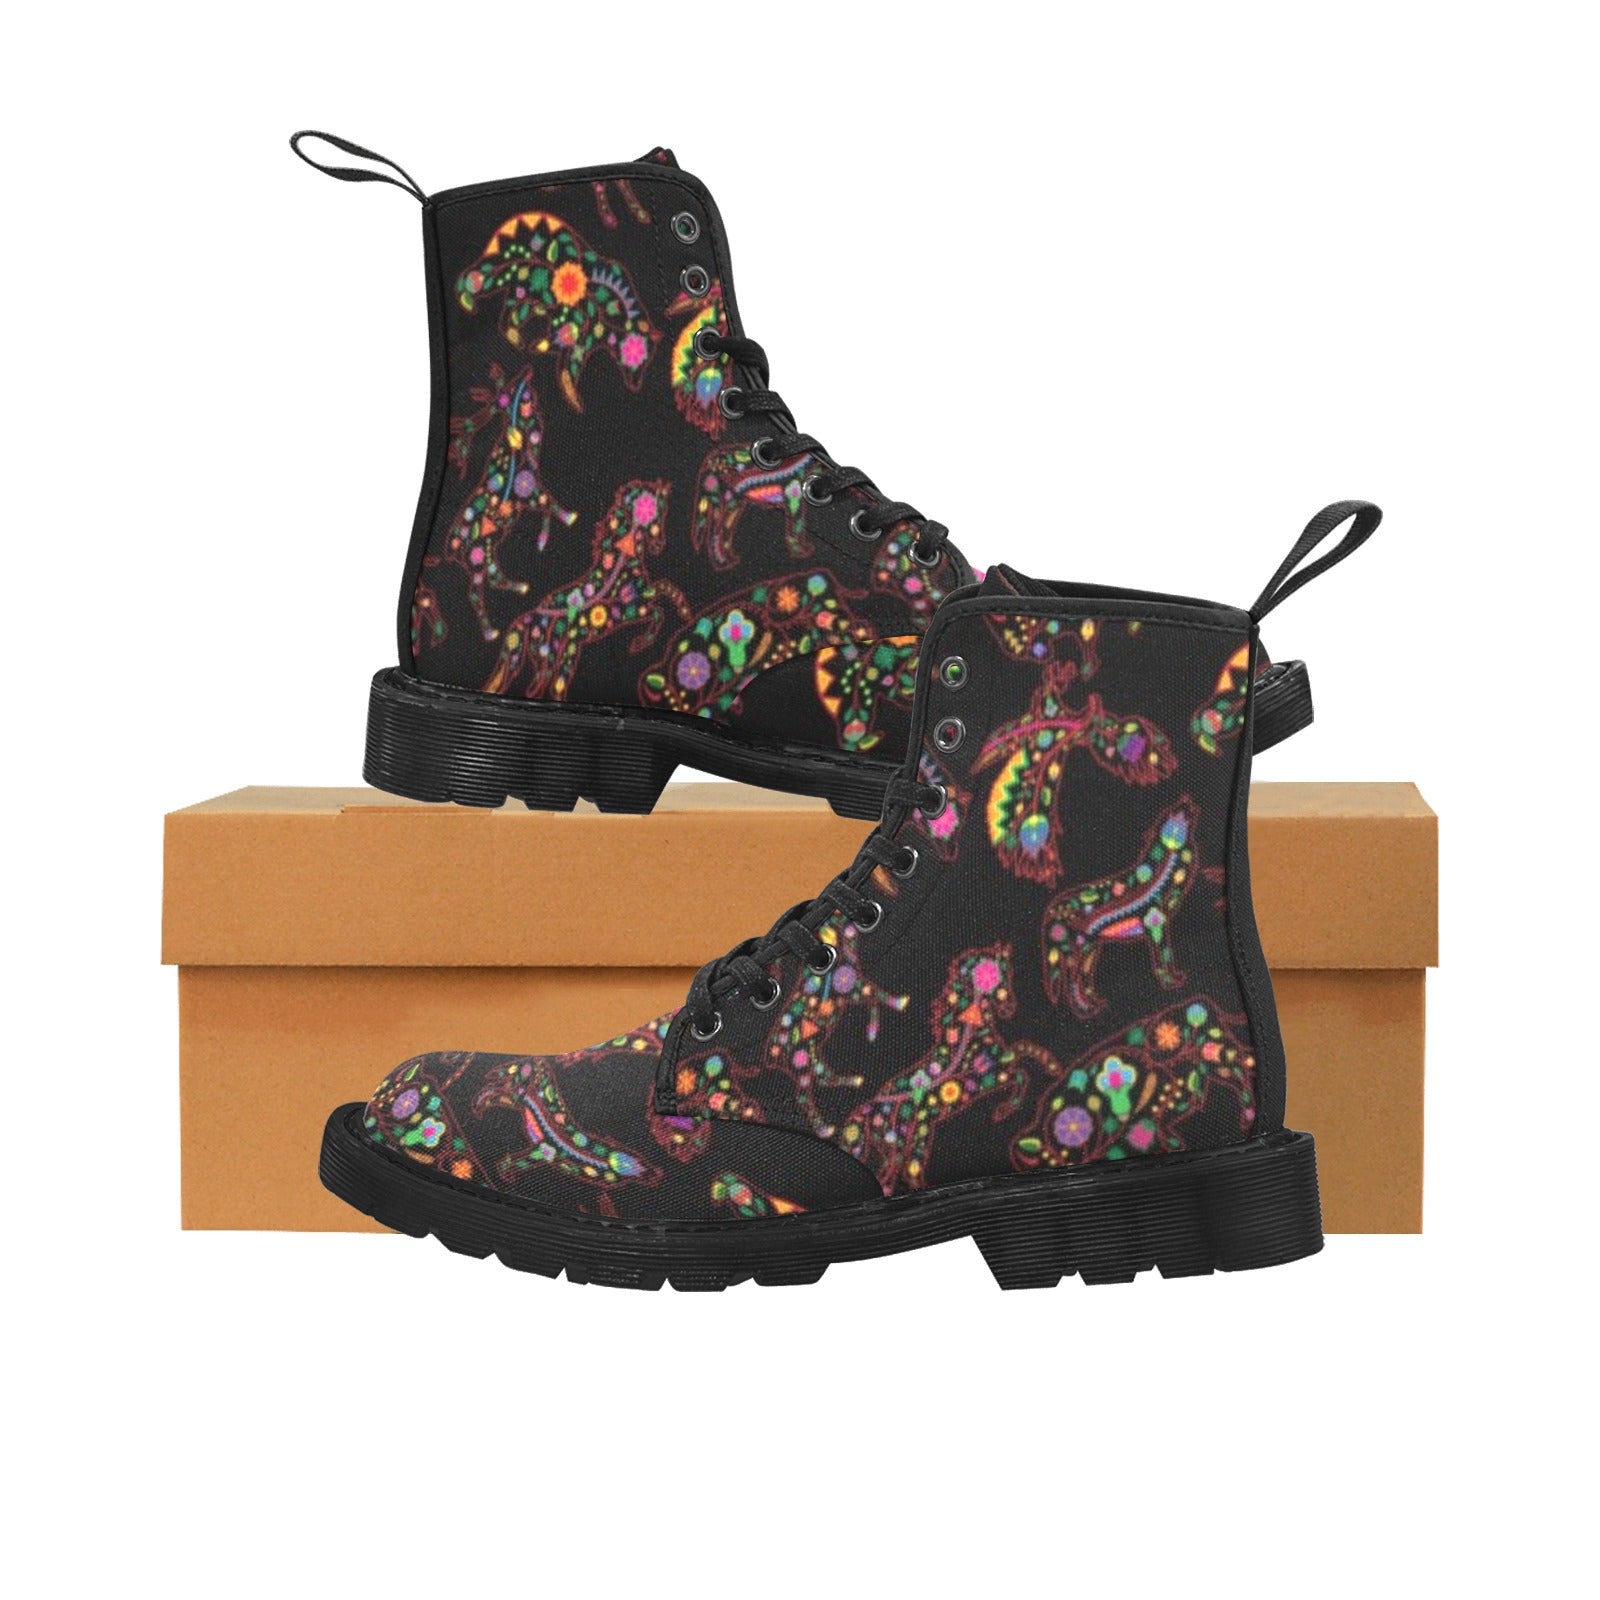 Neon Floral Animals Boots for Men (Black)